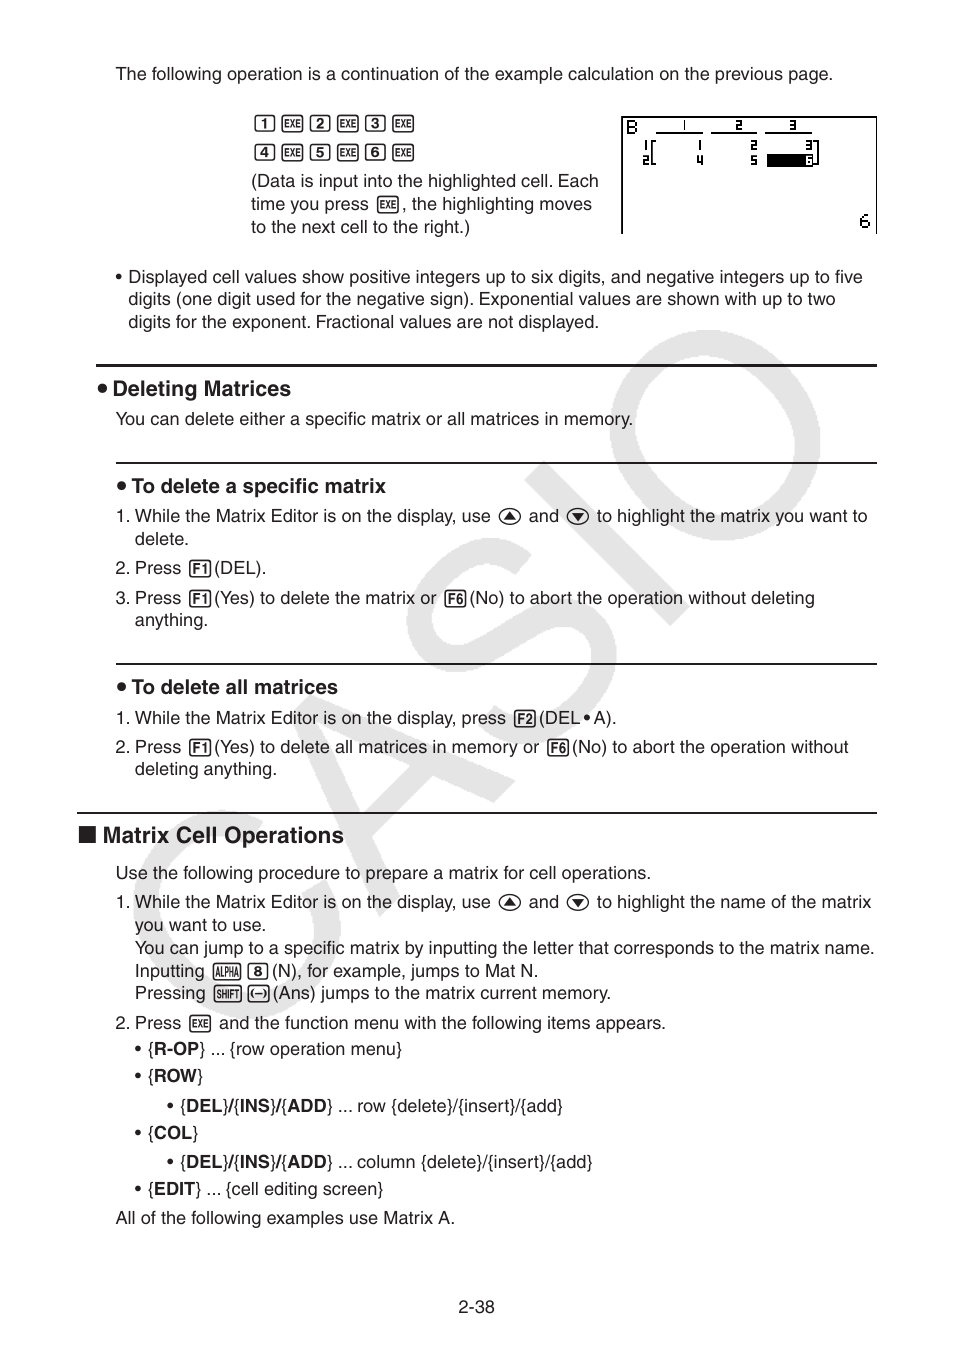 I matrix cell operations | Casio FX-9750GII User Manual | Page 76 / 402